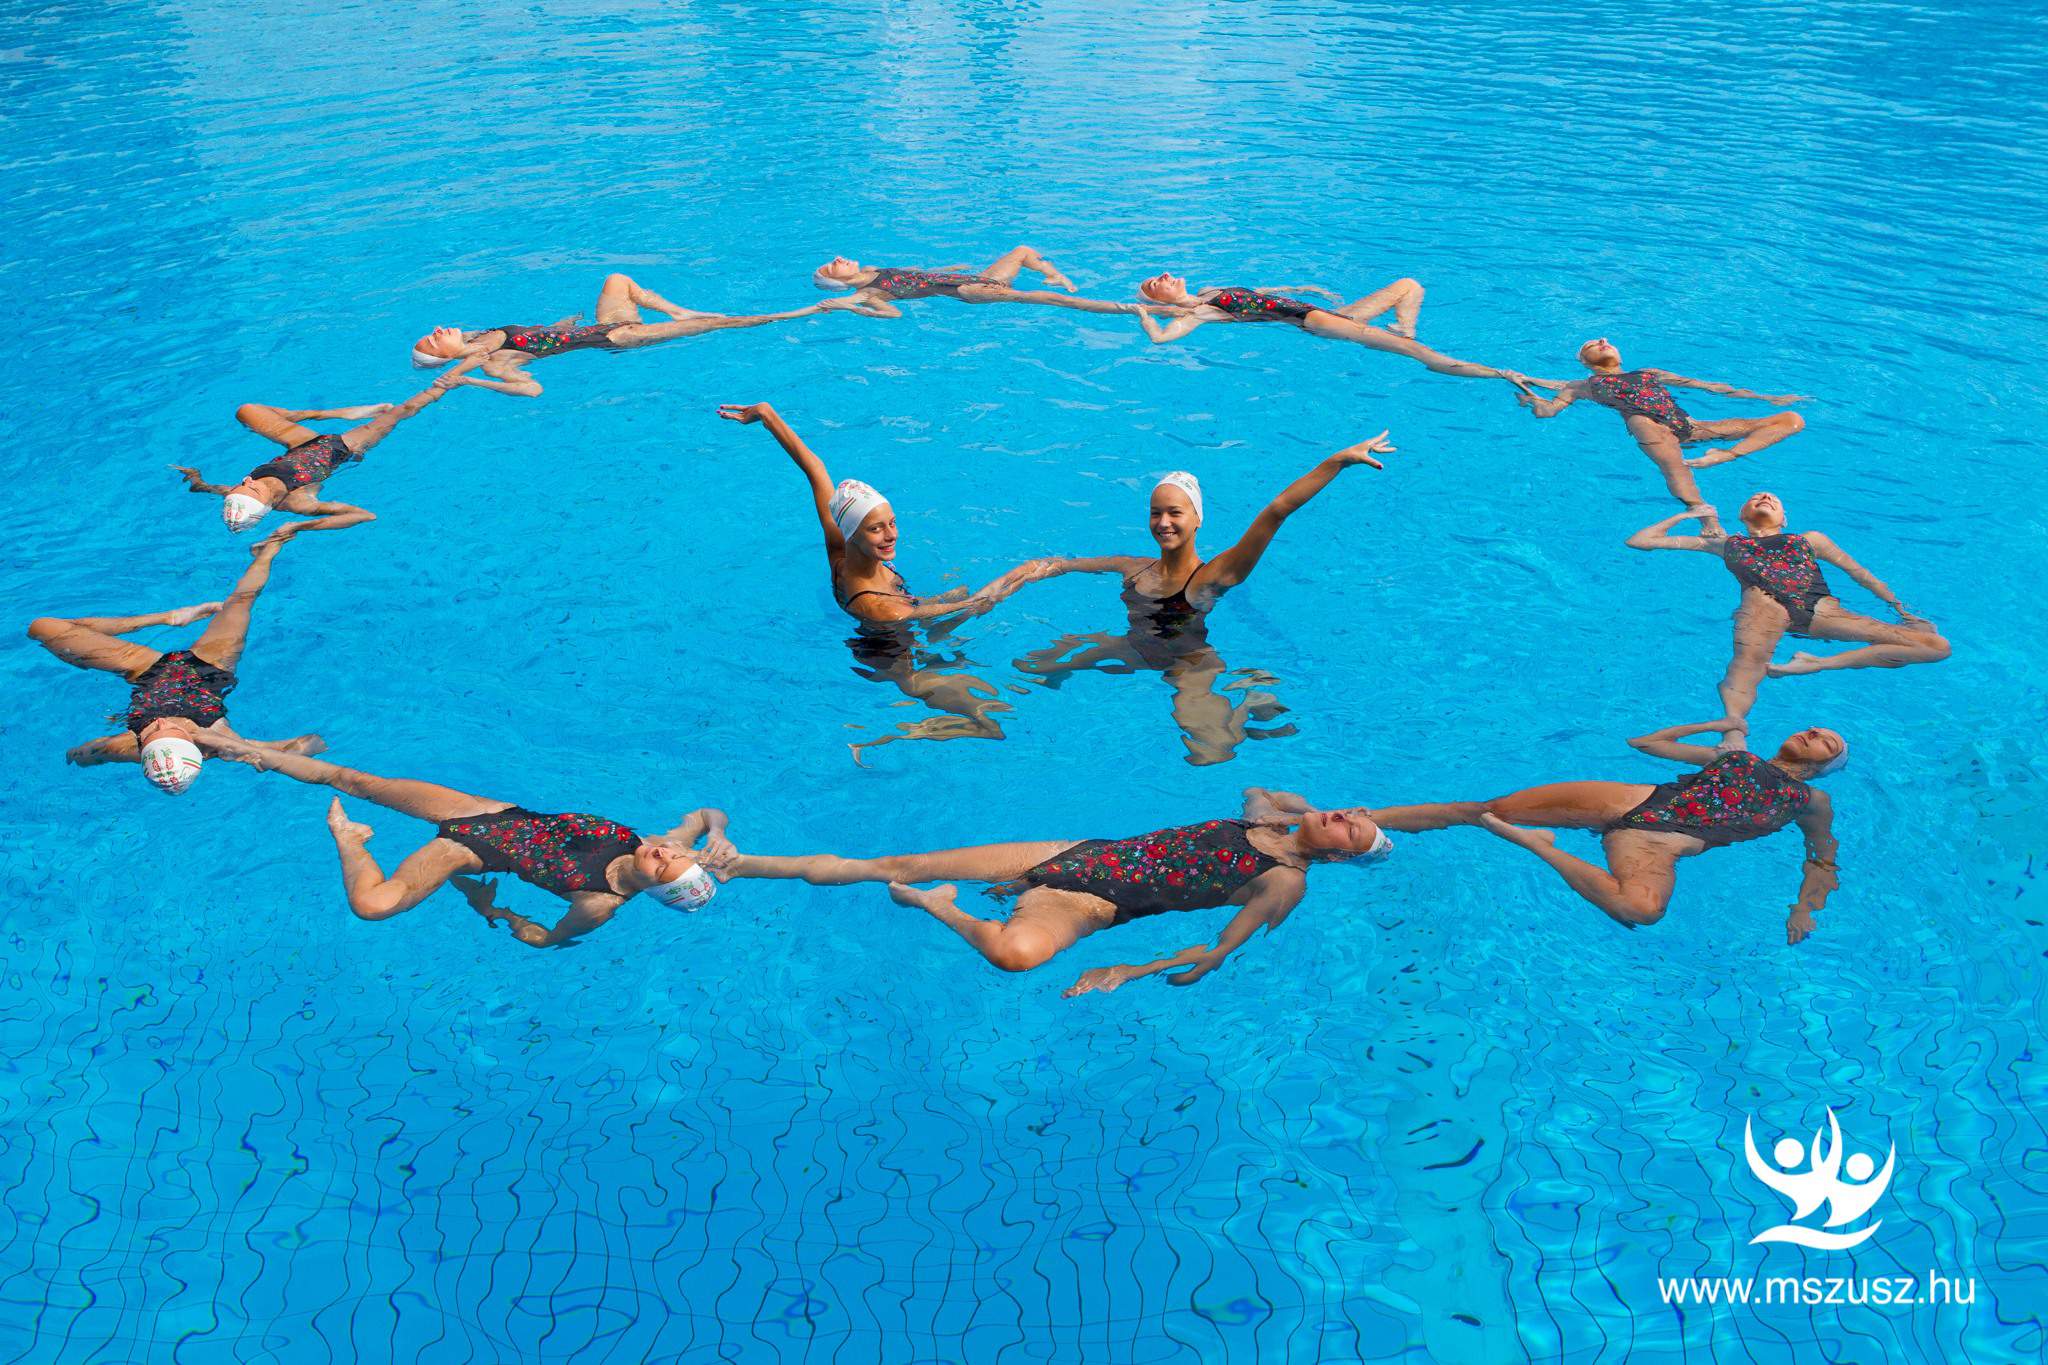 synchronised artistic swimming